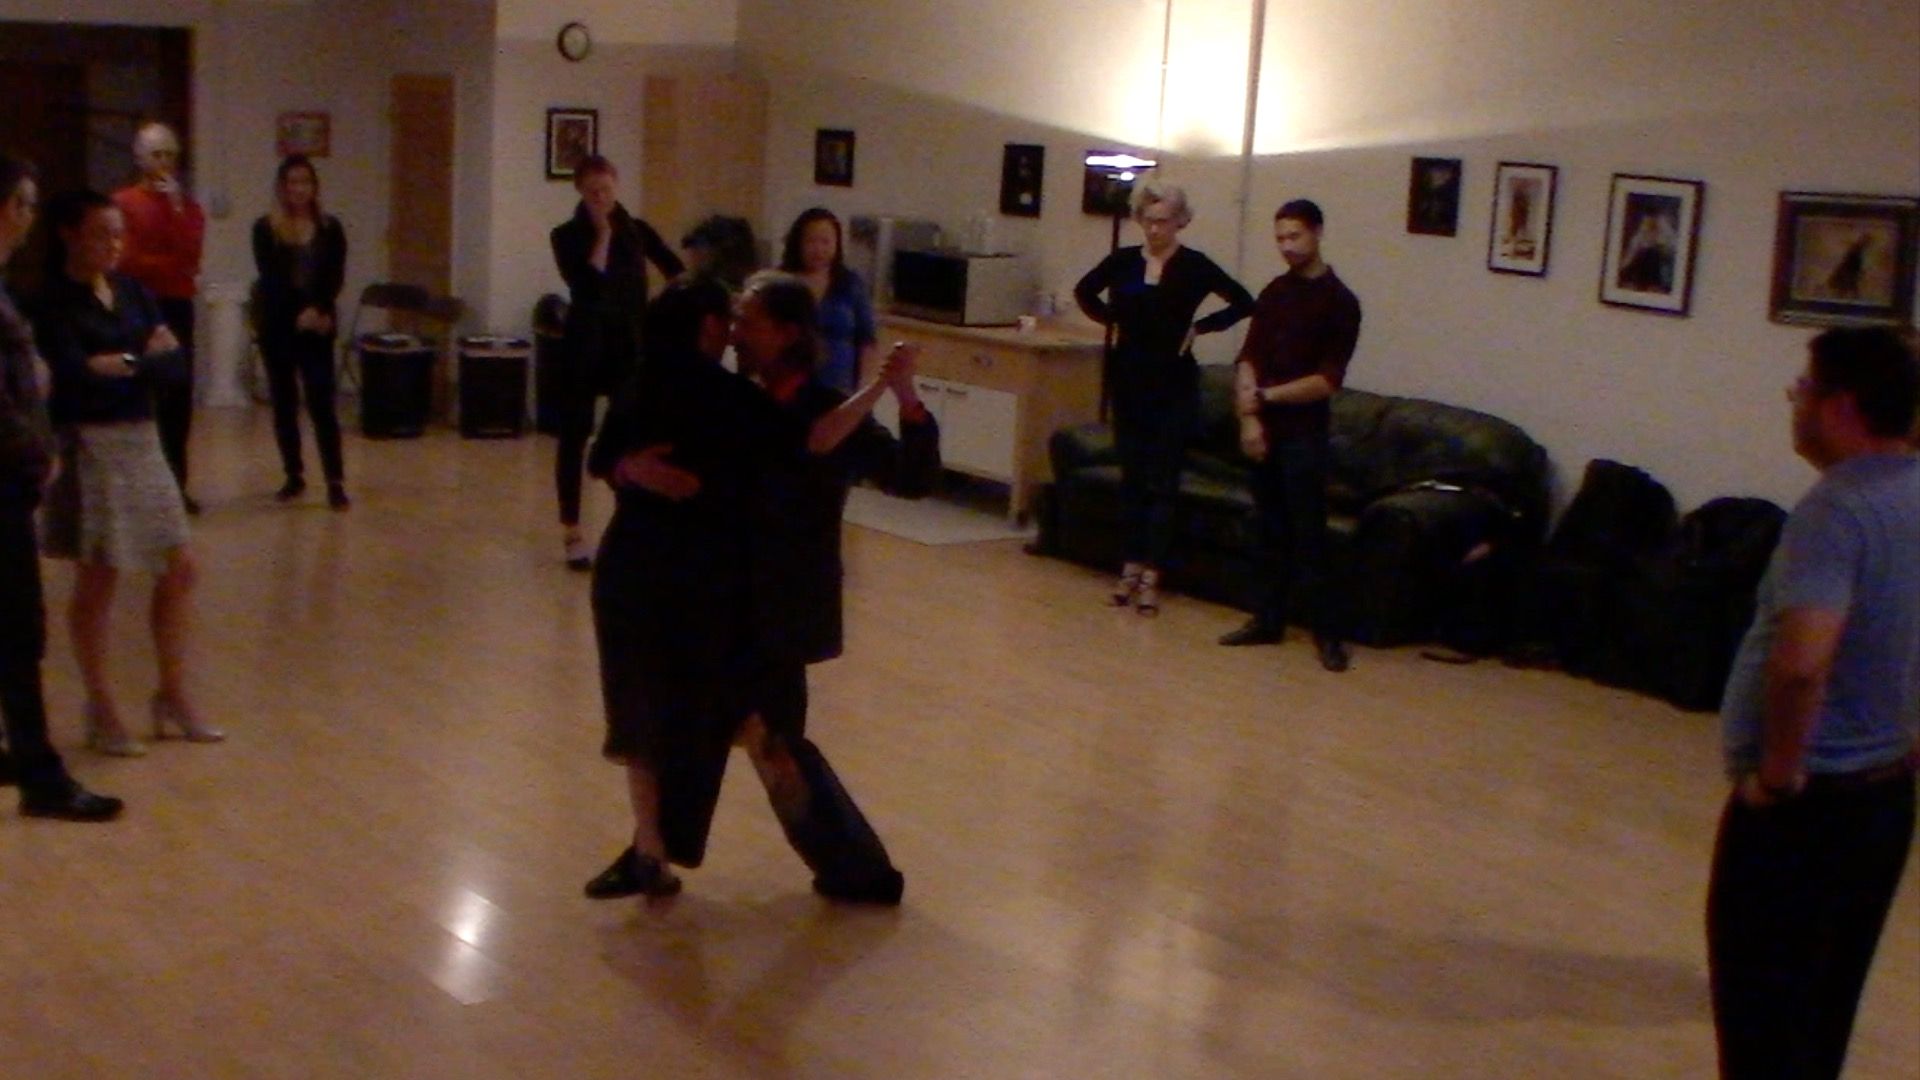 Argentine Tango dancing with Miranda at our beginner's class in San Francisco, October 2019